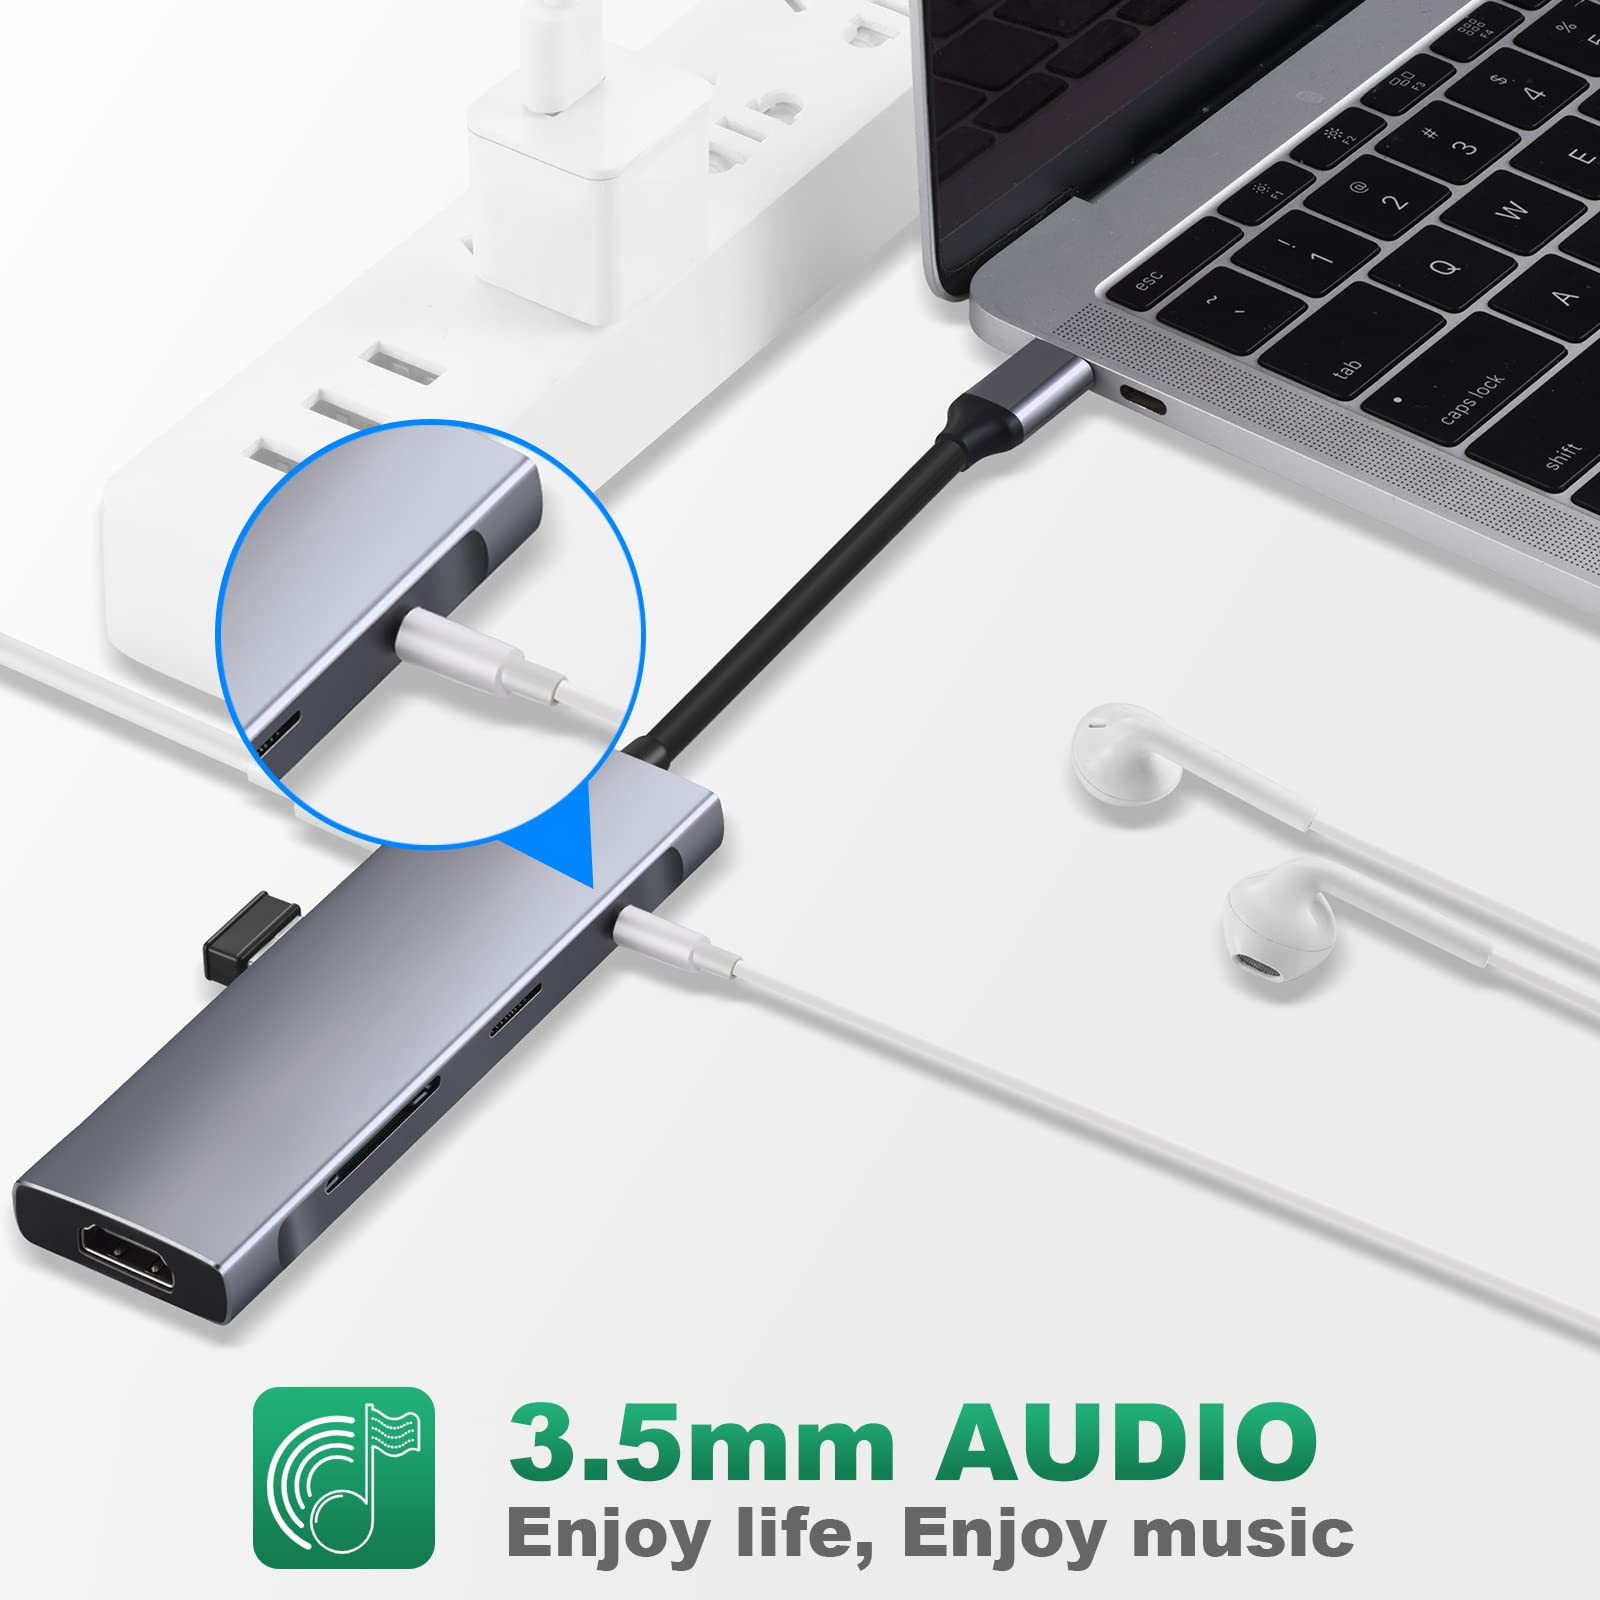 USB C Hub Multiport Adapter 9 in 1 Docking Station USB C to 4K HDMI Adapter with 3 USB3.0,Audio,Tf/Sd Card Reader,100W PD Charger,USB-C Port Compatible for MacBook Laptops More Type C Devices